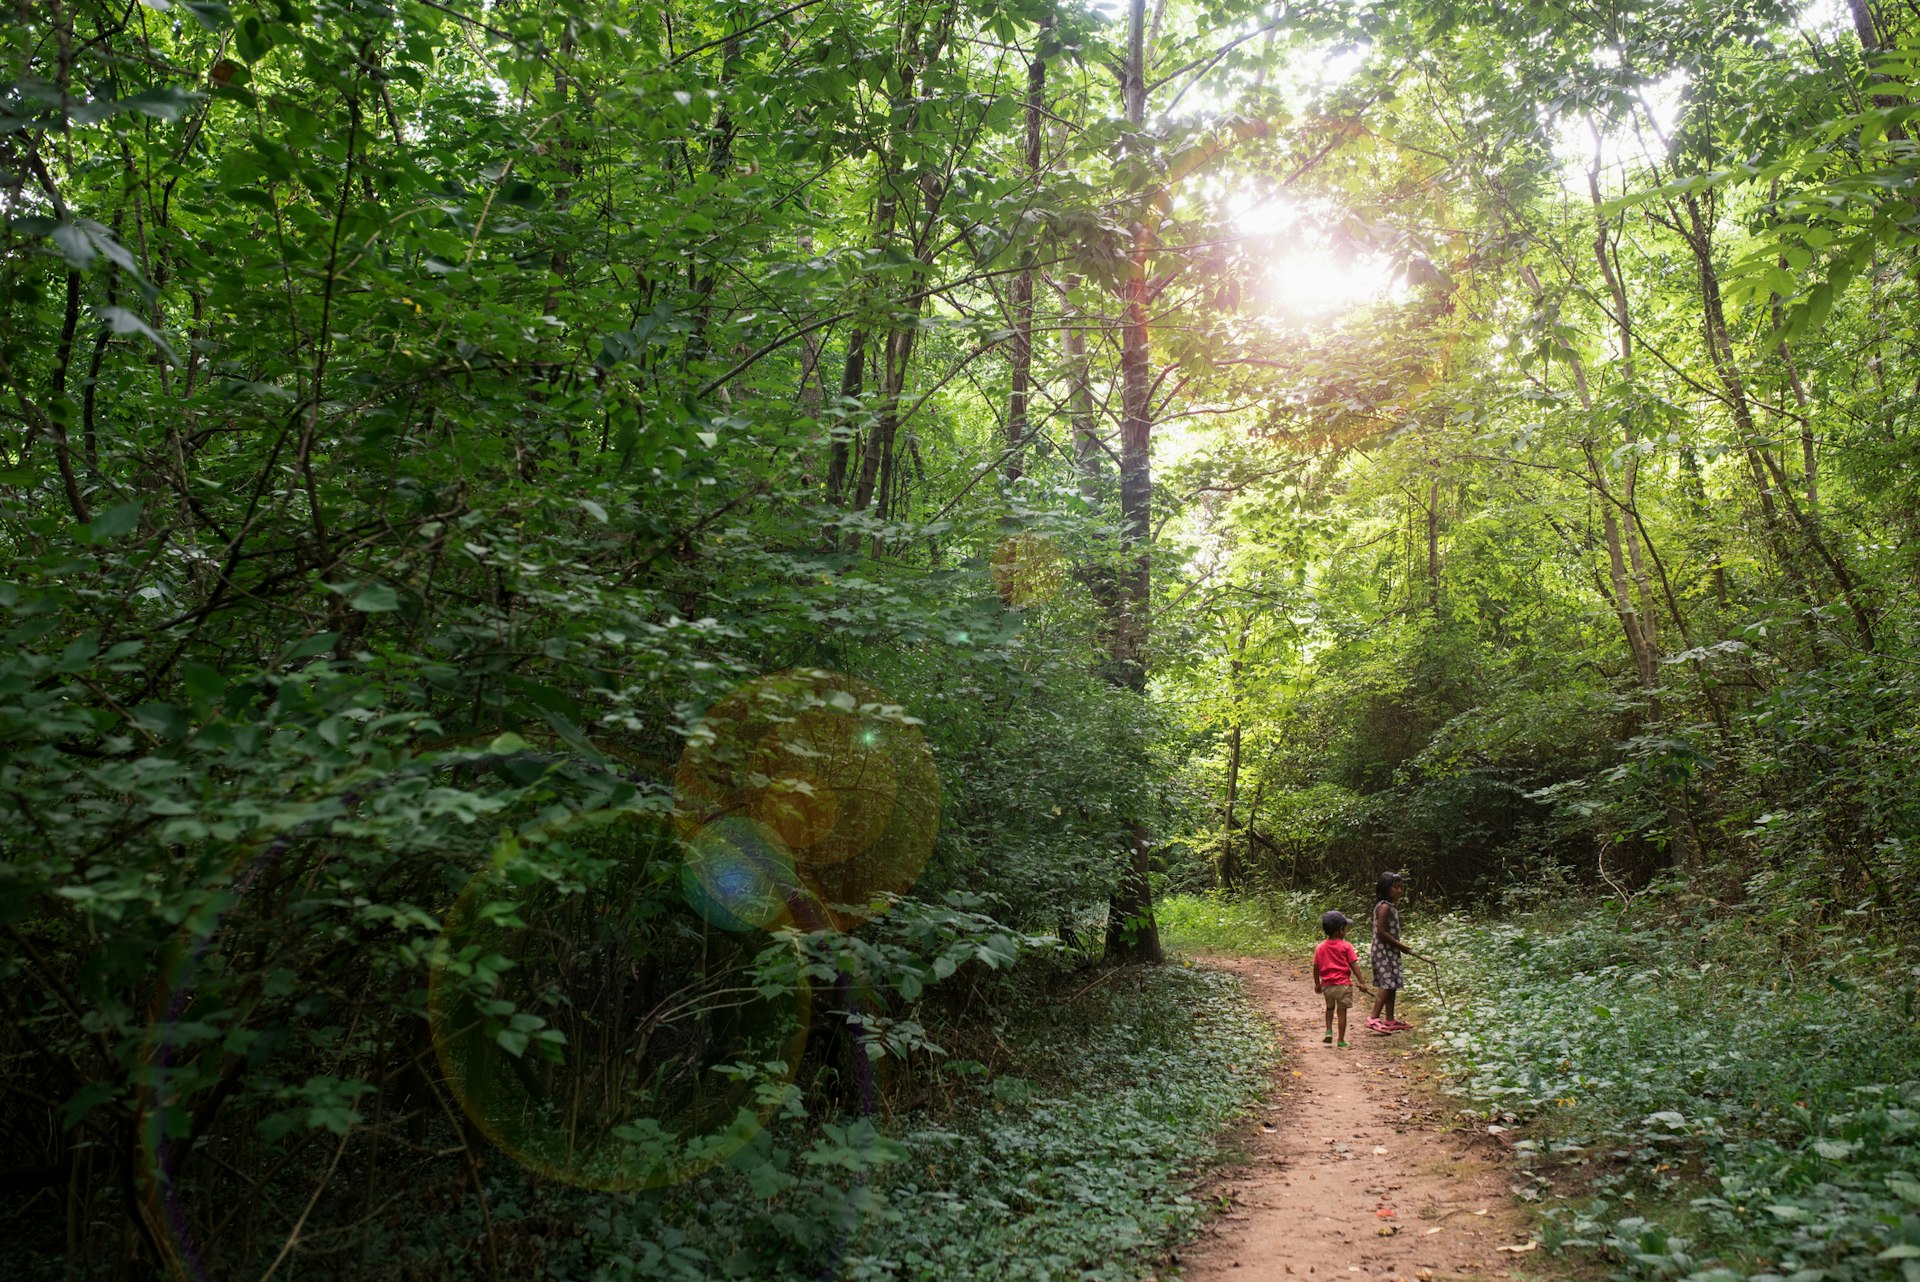 Two small children follow a trail through green woodland on a summer's day